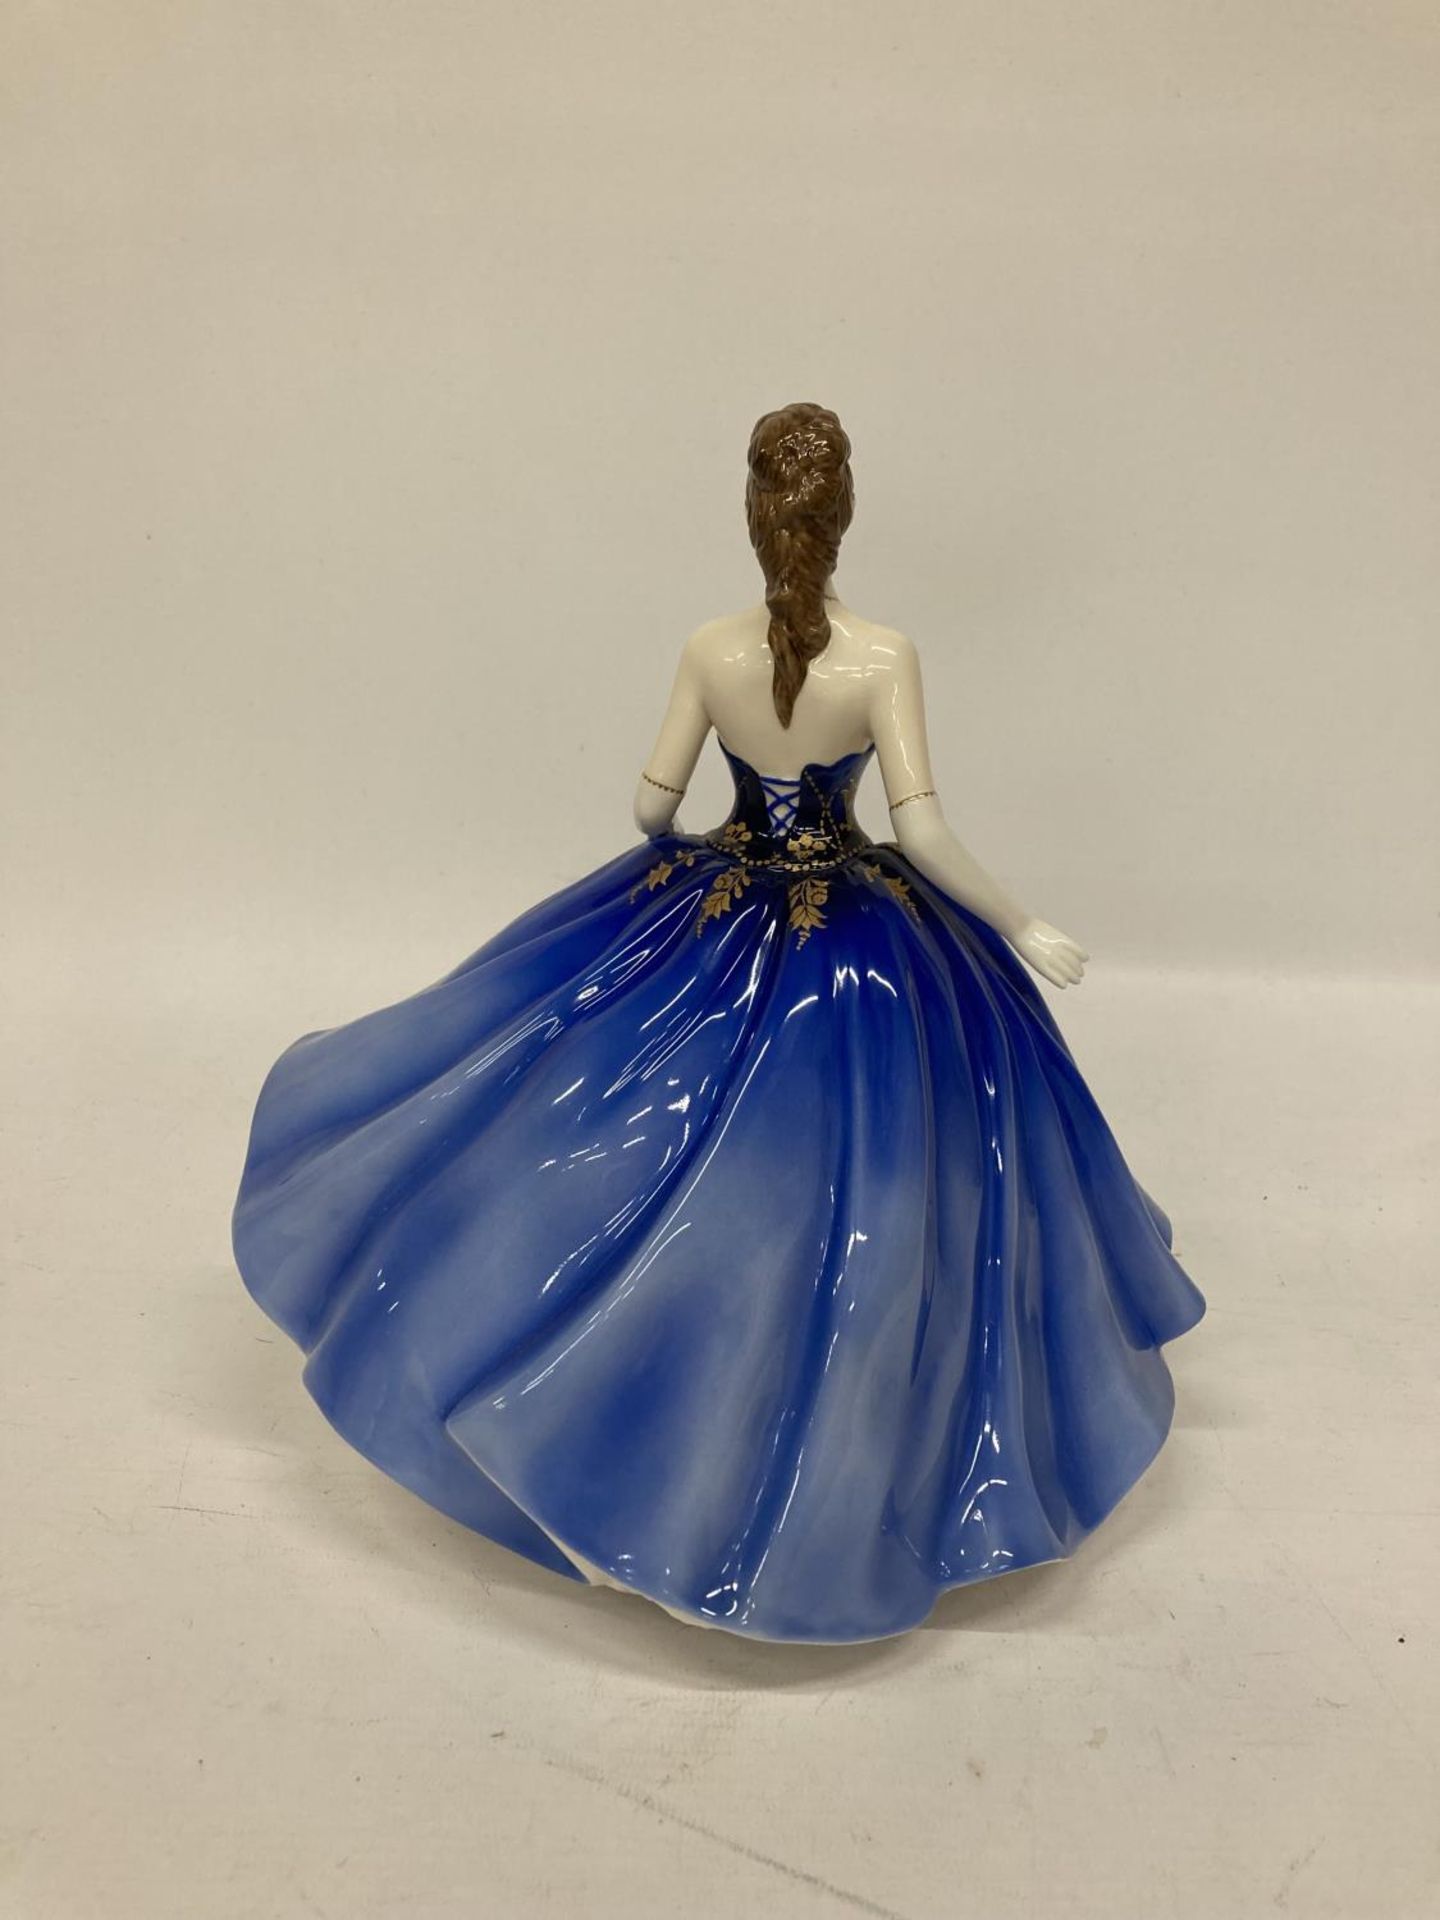 A ROYAL DOULTON FIGURINE FROM THE CLASSICS COLLECTION "ABIGAIL" LADY OF THE YEAR 2006 HN4824 - Image 3 of 5